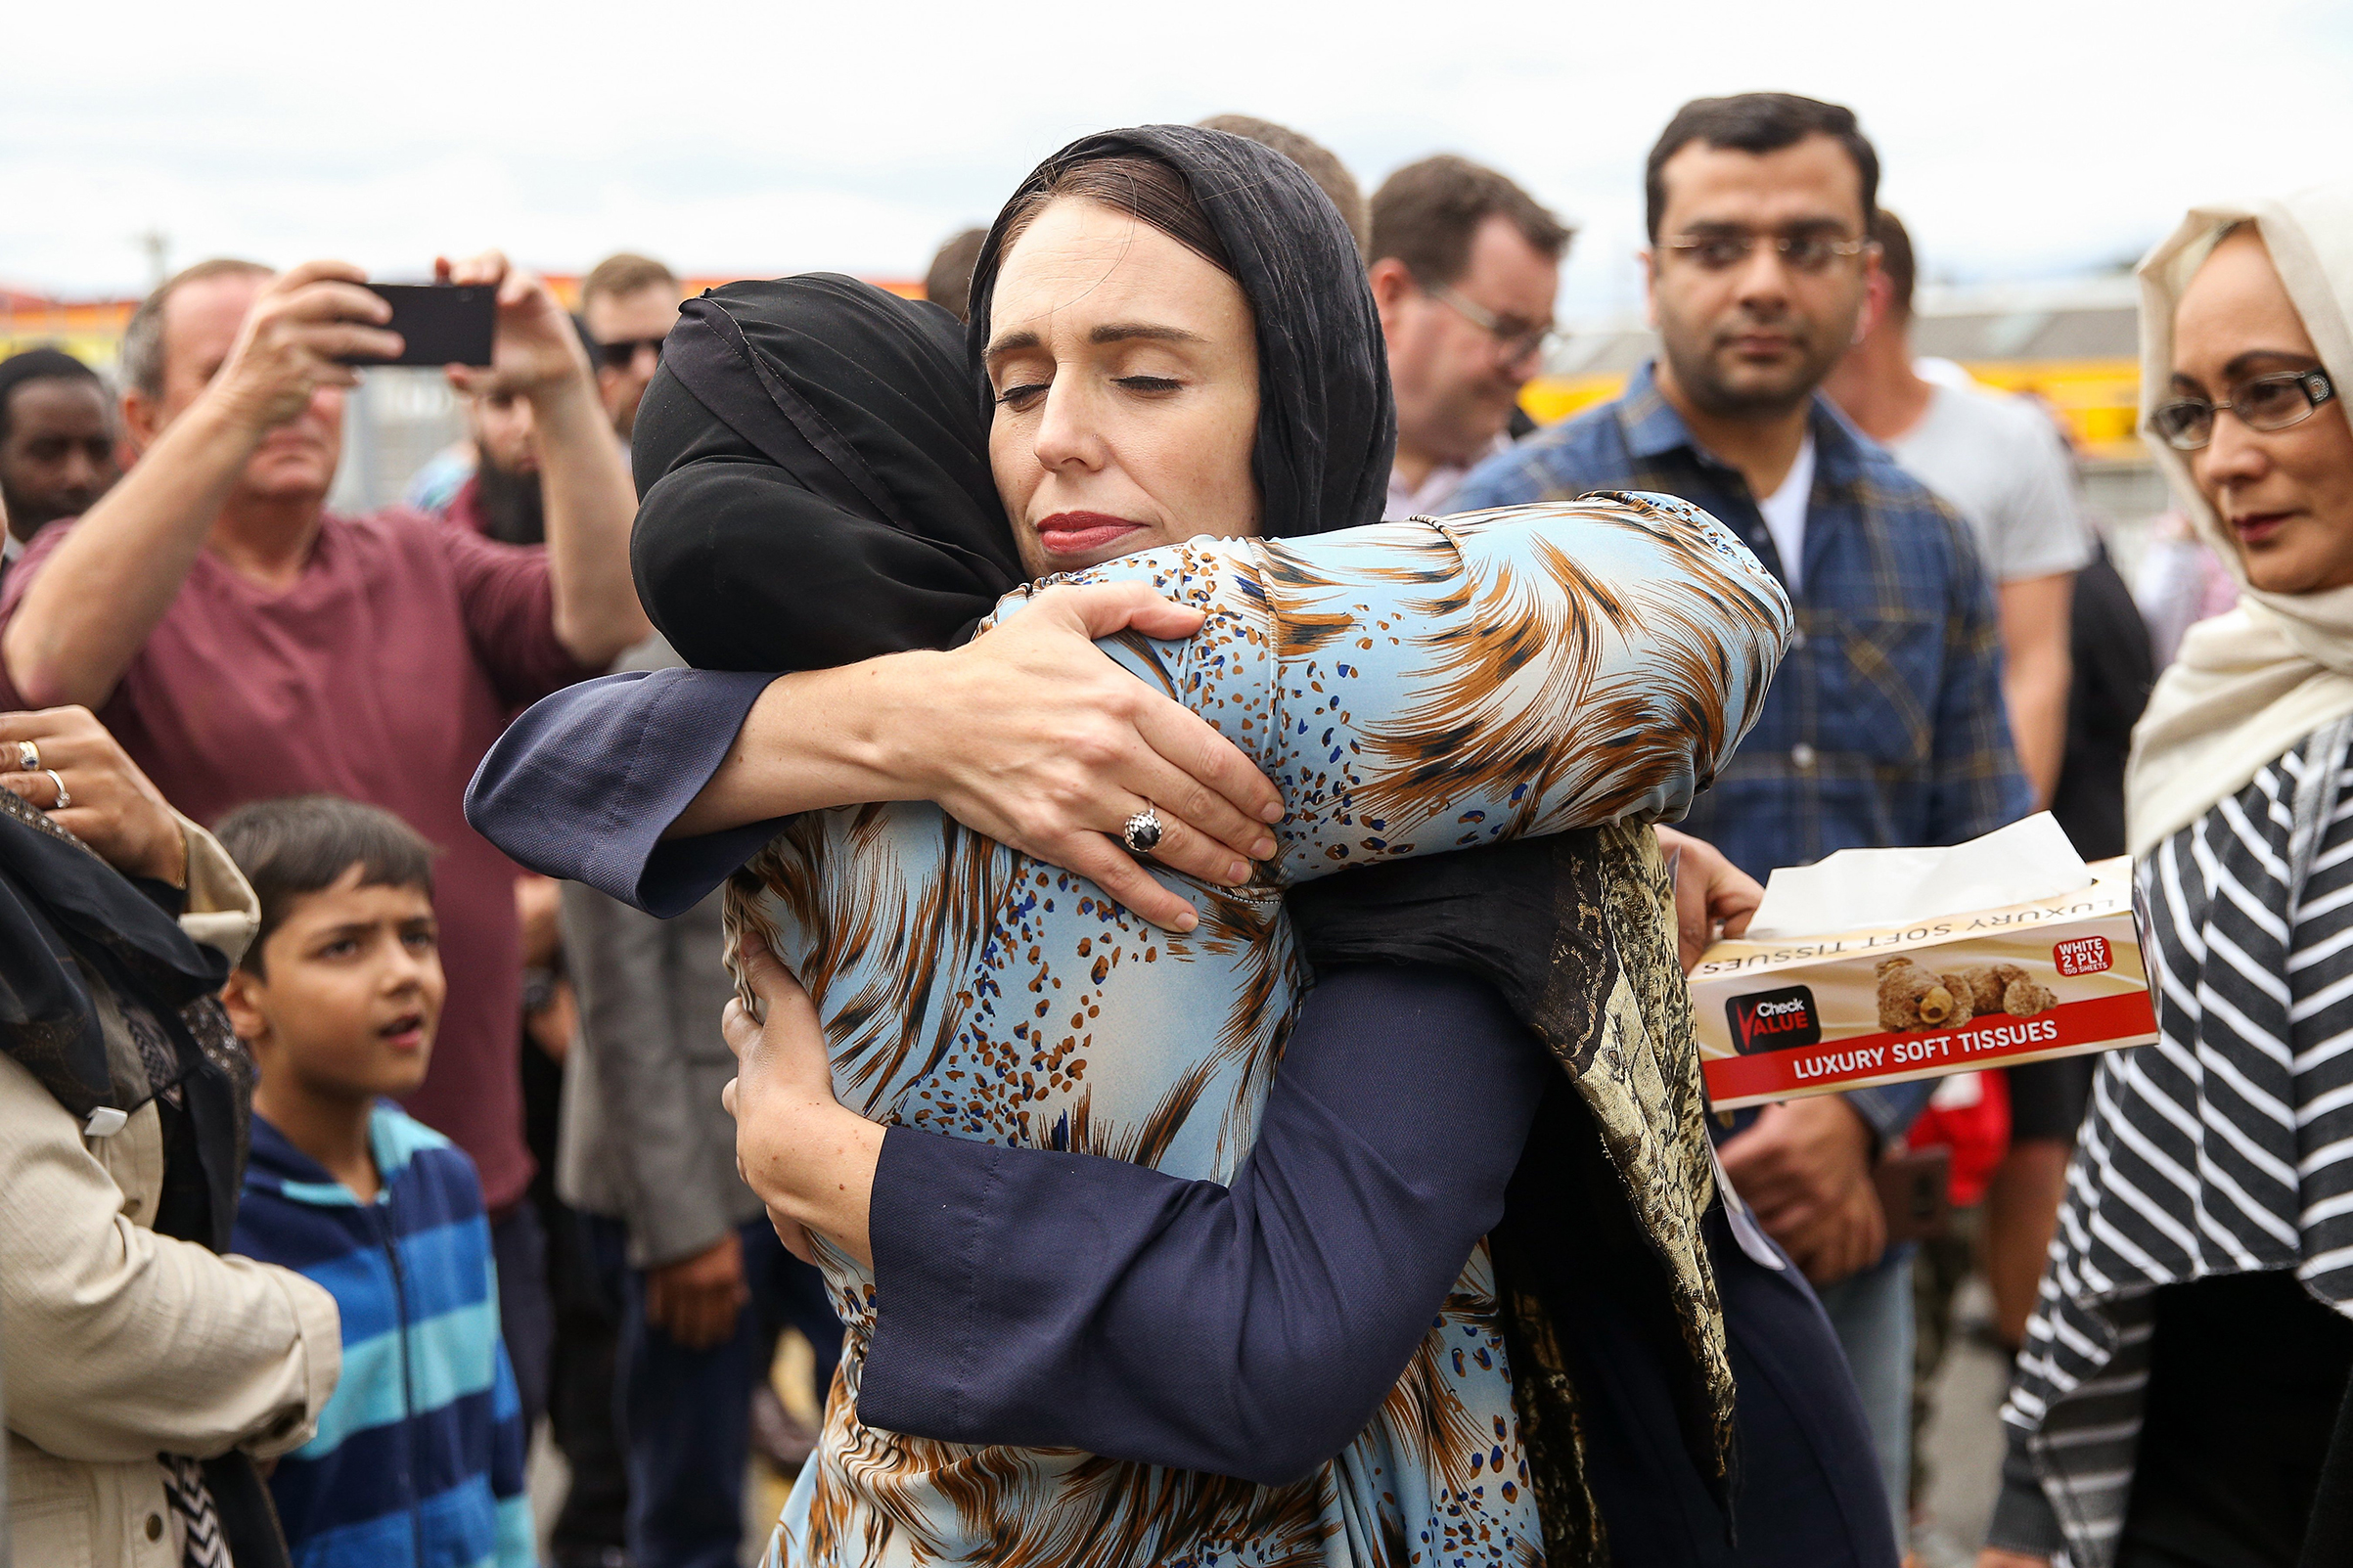 New Zealand Prime Minister Jacinda Ardern hugs a worshipper at Kilbirnie Mosque in Wellington two days after the attacks (Hagen Hopkins—Getty Images)